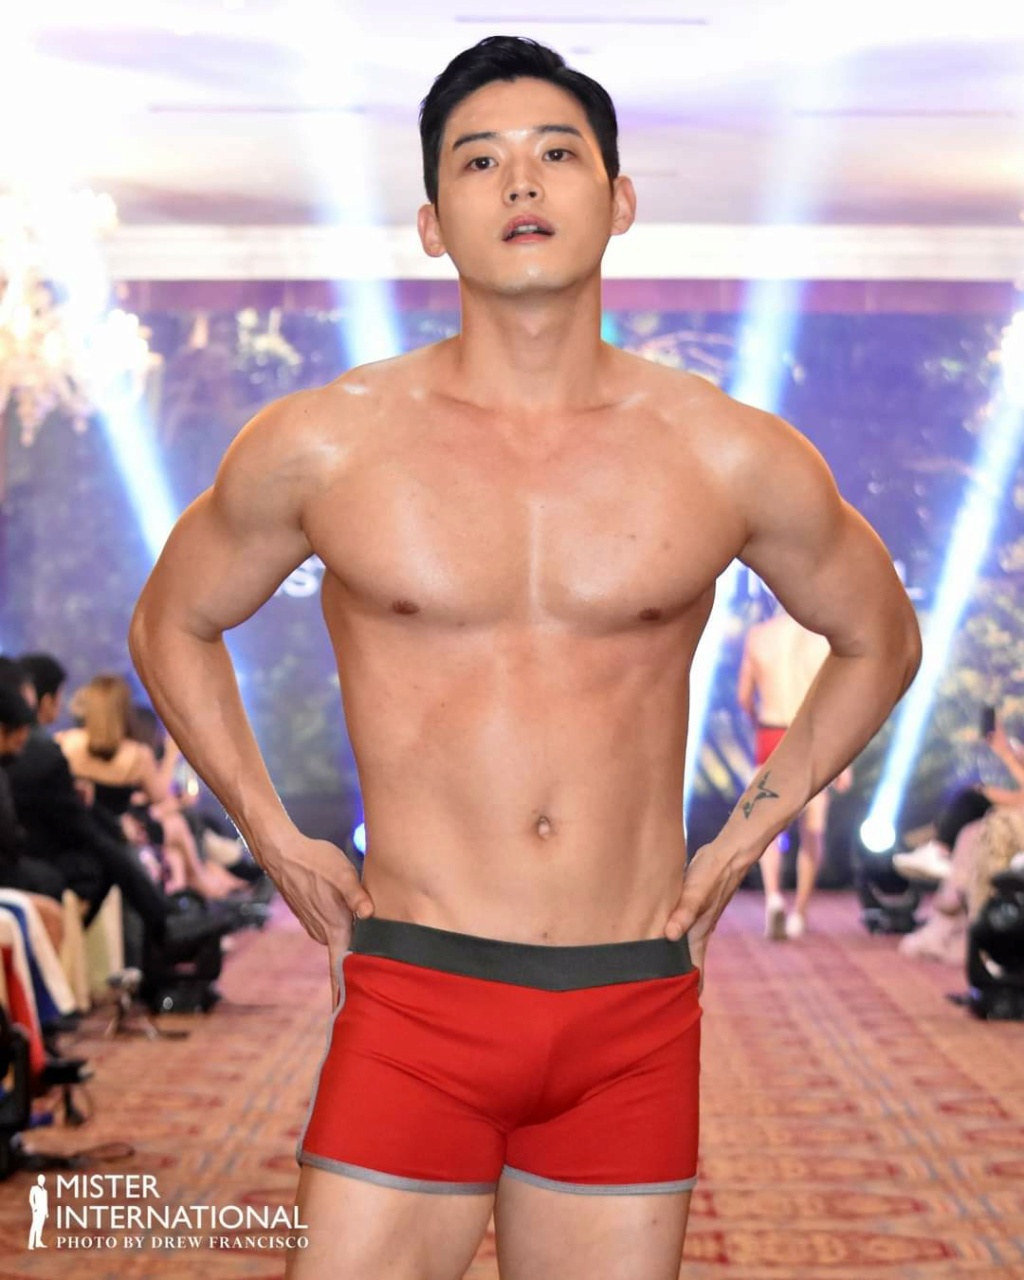 14th Mister International in Manila, Philippines - Oct 30th, 2022 - Winner is Dominican Republic - Page 4 Fb_i1155